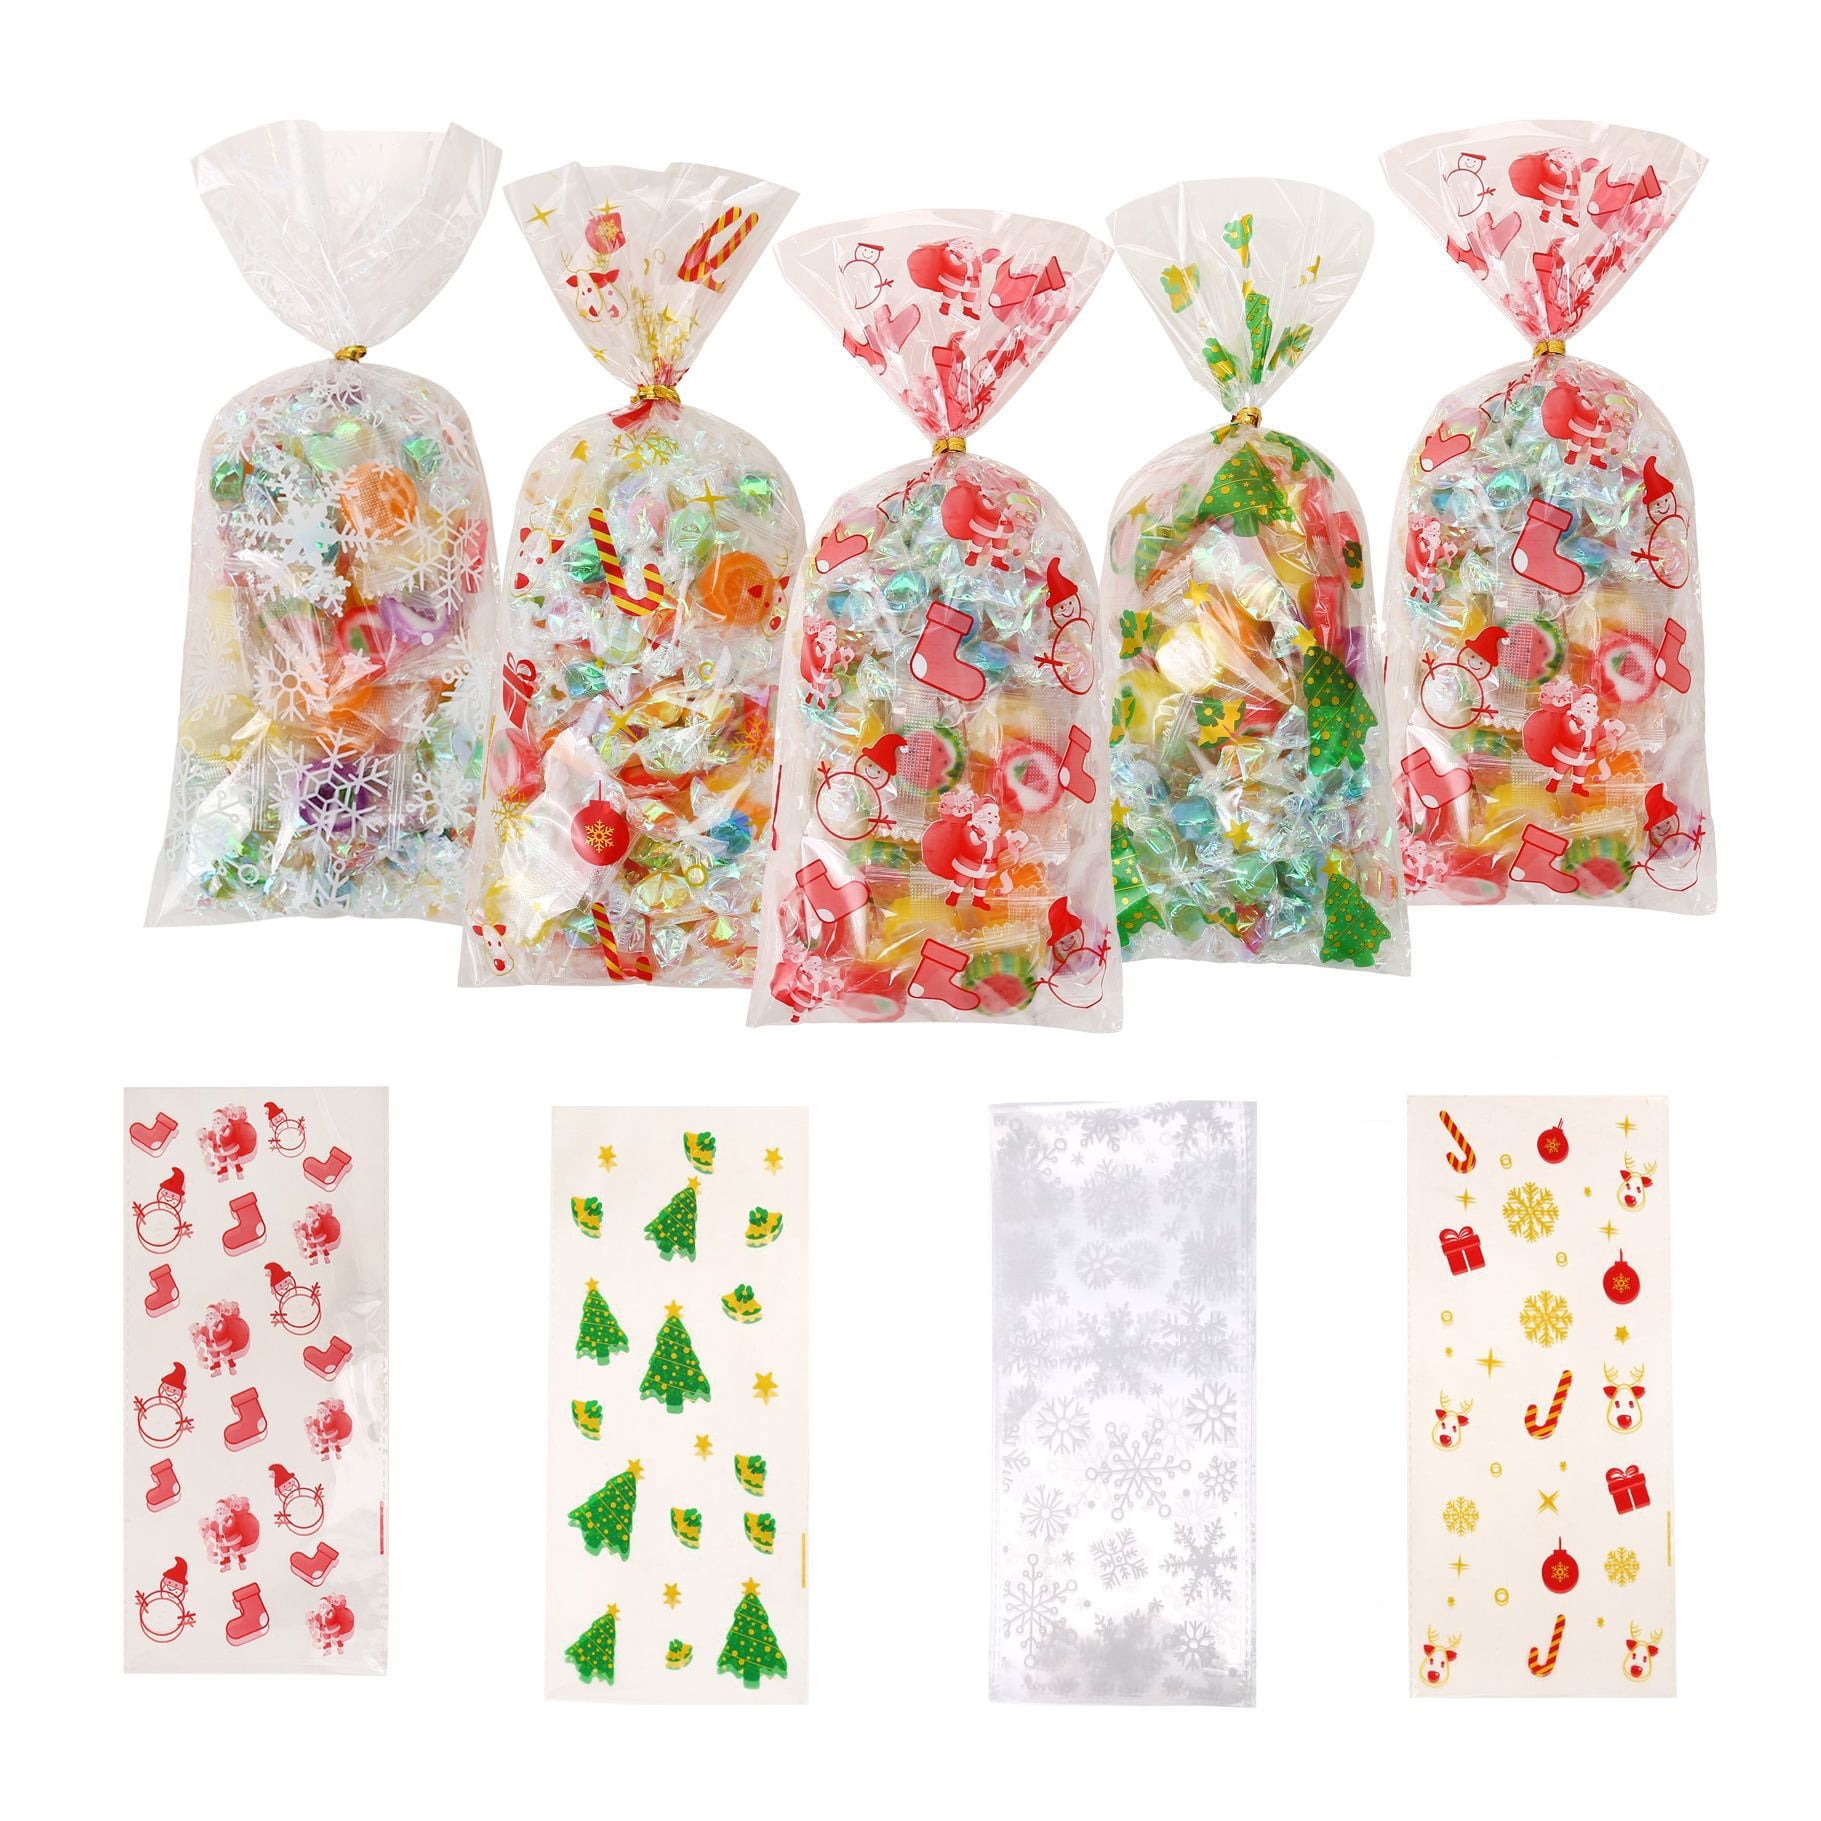 100pcs Clear Candy Christmas Xmas Party Gift Cellophane Cello Bags Self Adhesive 